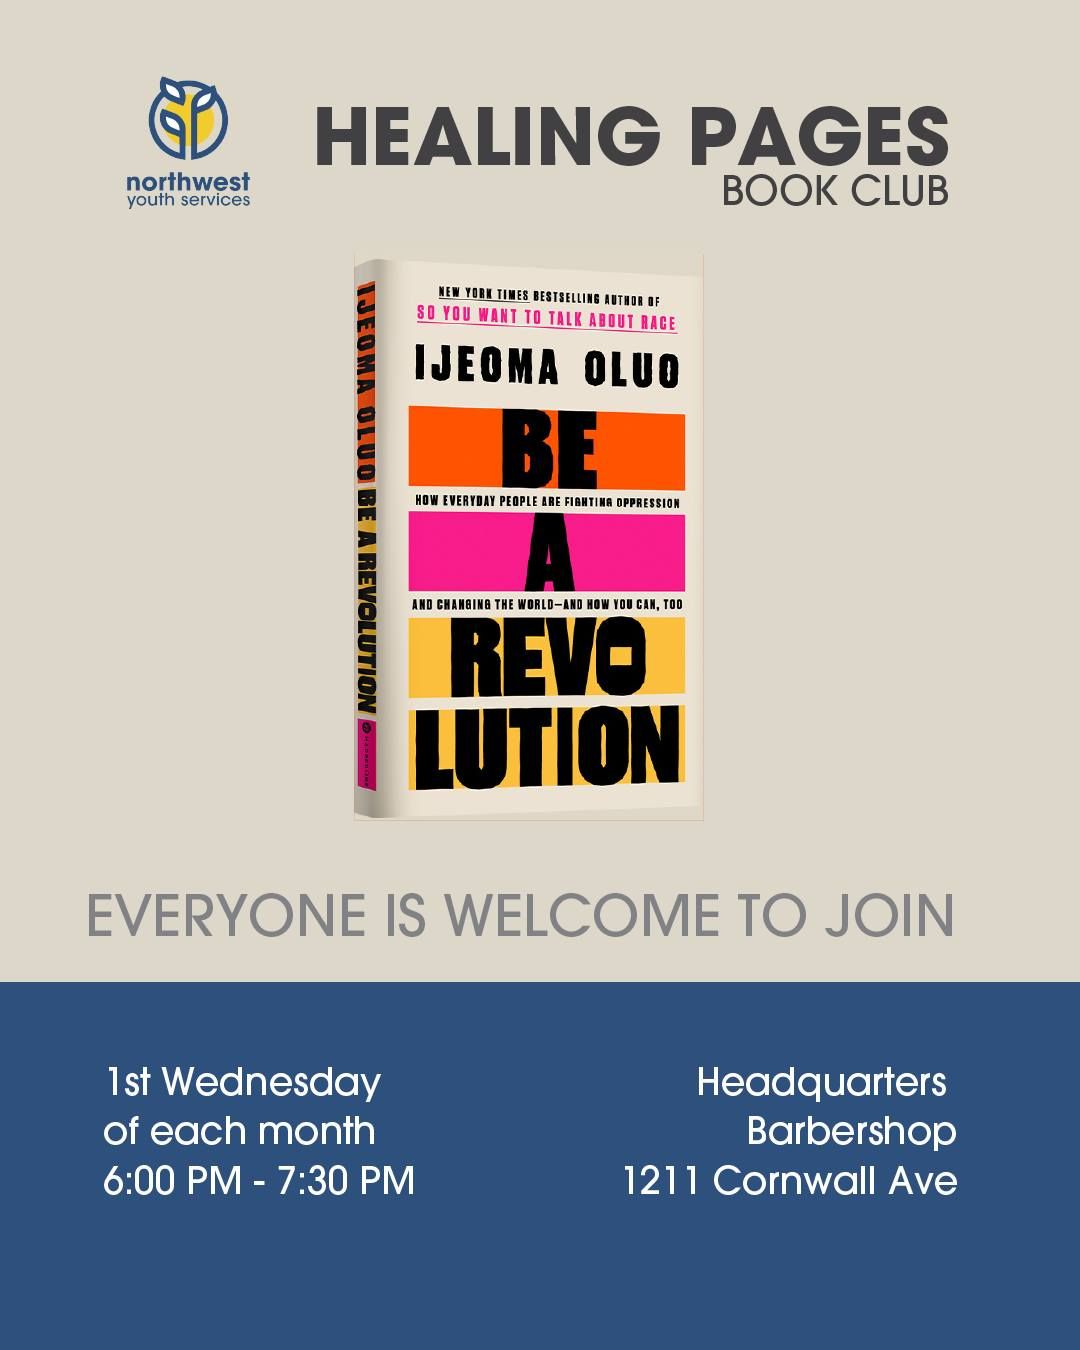 NWYS | Healing Pages Book Club